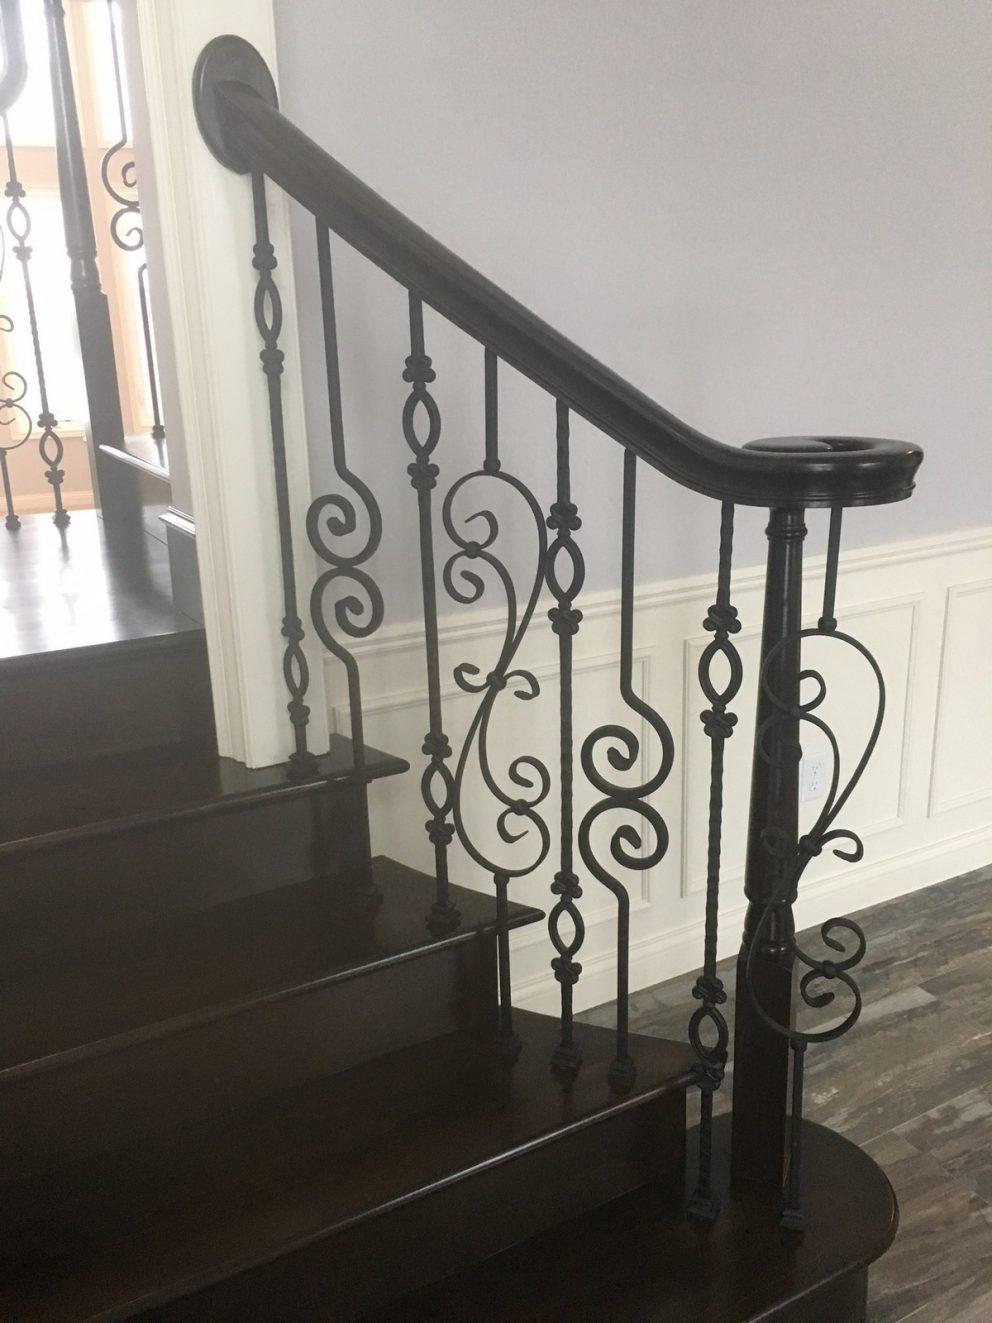 Staircase landing showing off the decorative rod iron spindles and full wood finish